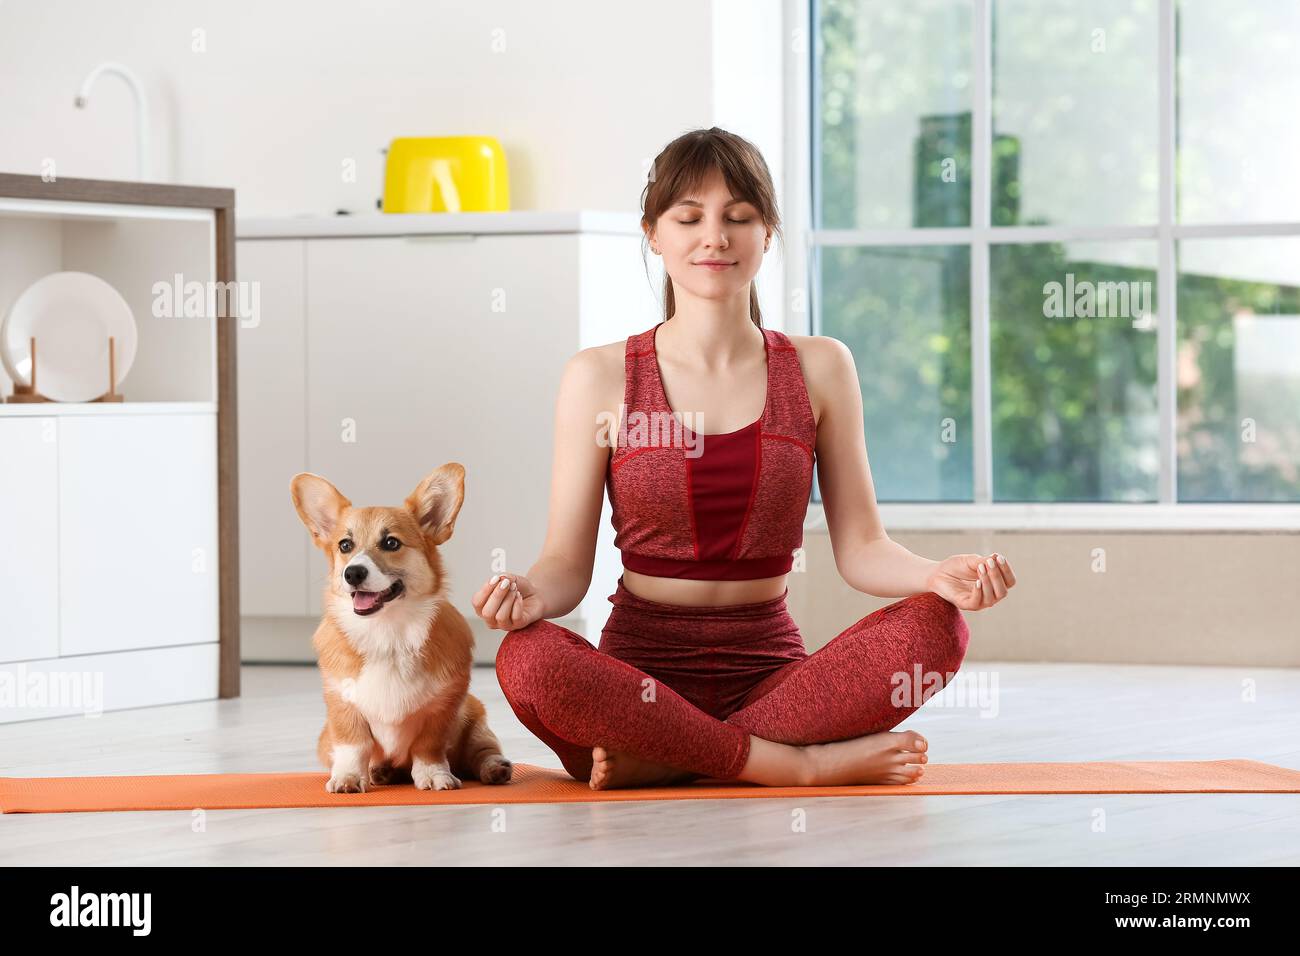 Sporty young woman meditating with cute Corgi dog on yoga mat in